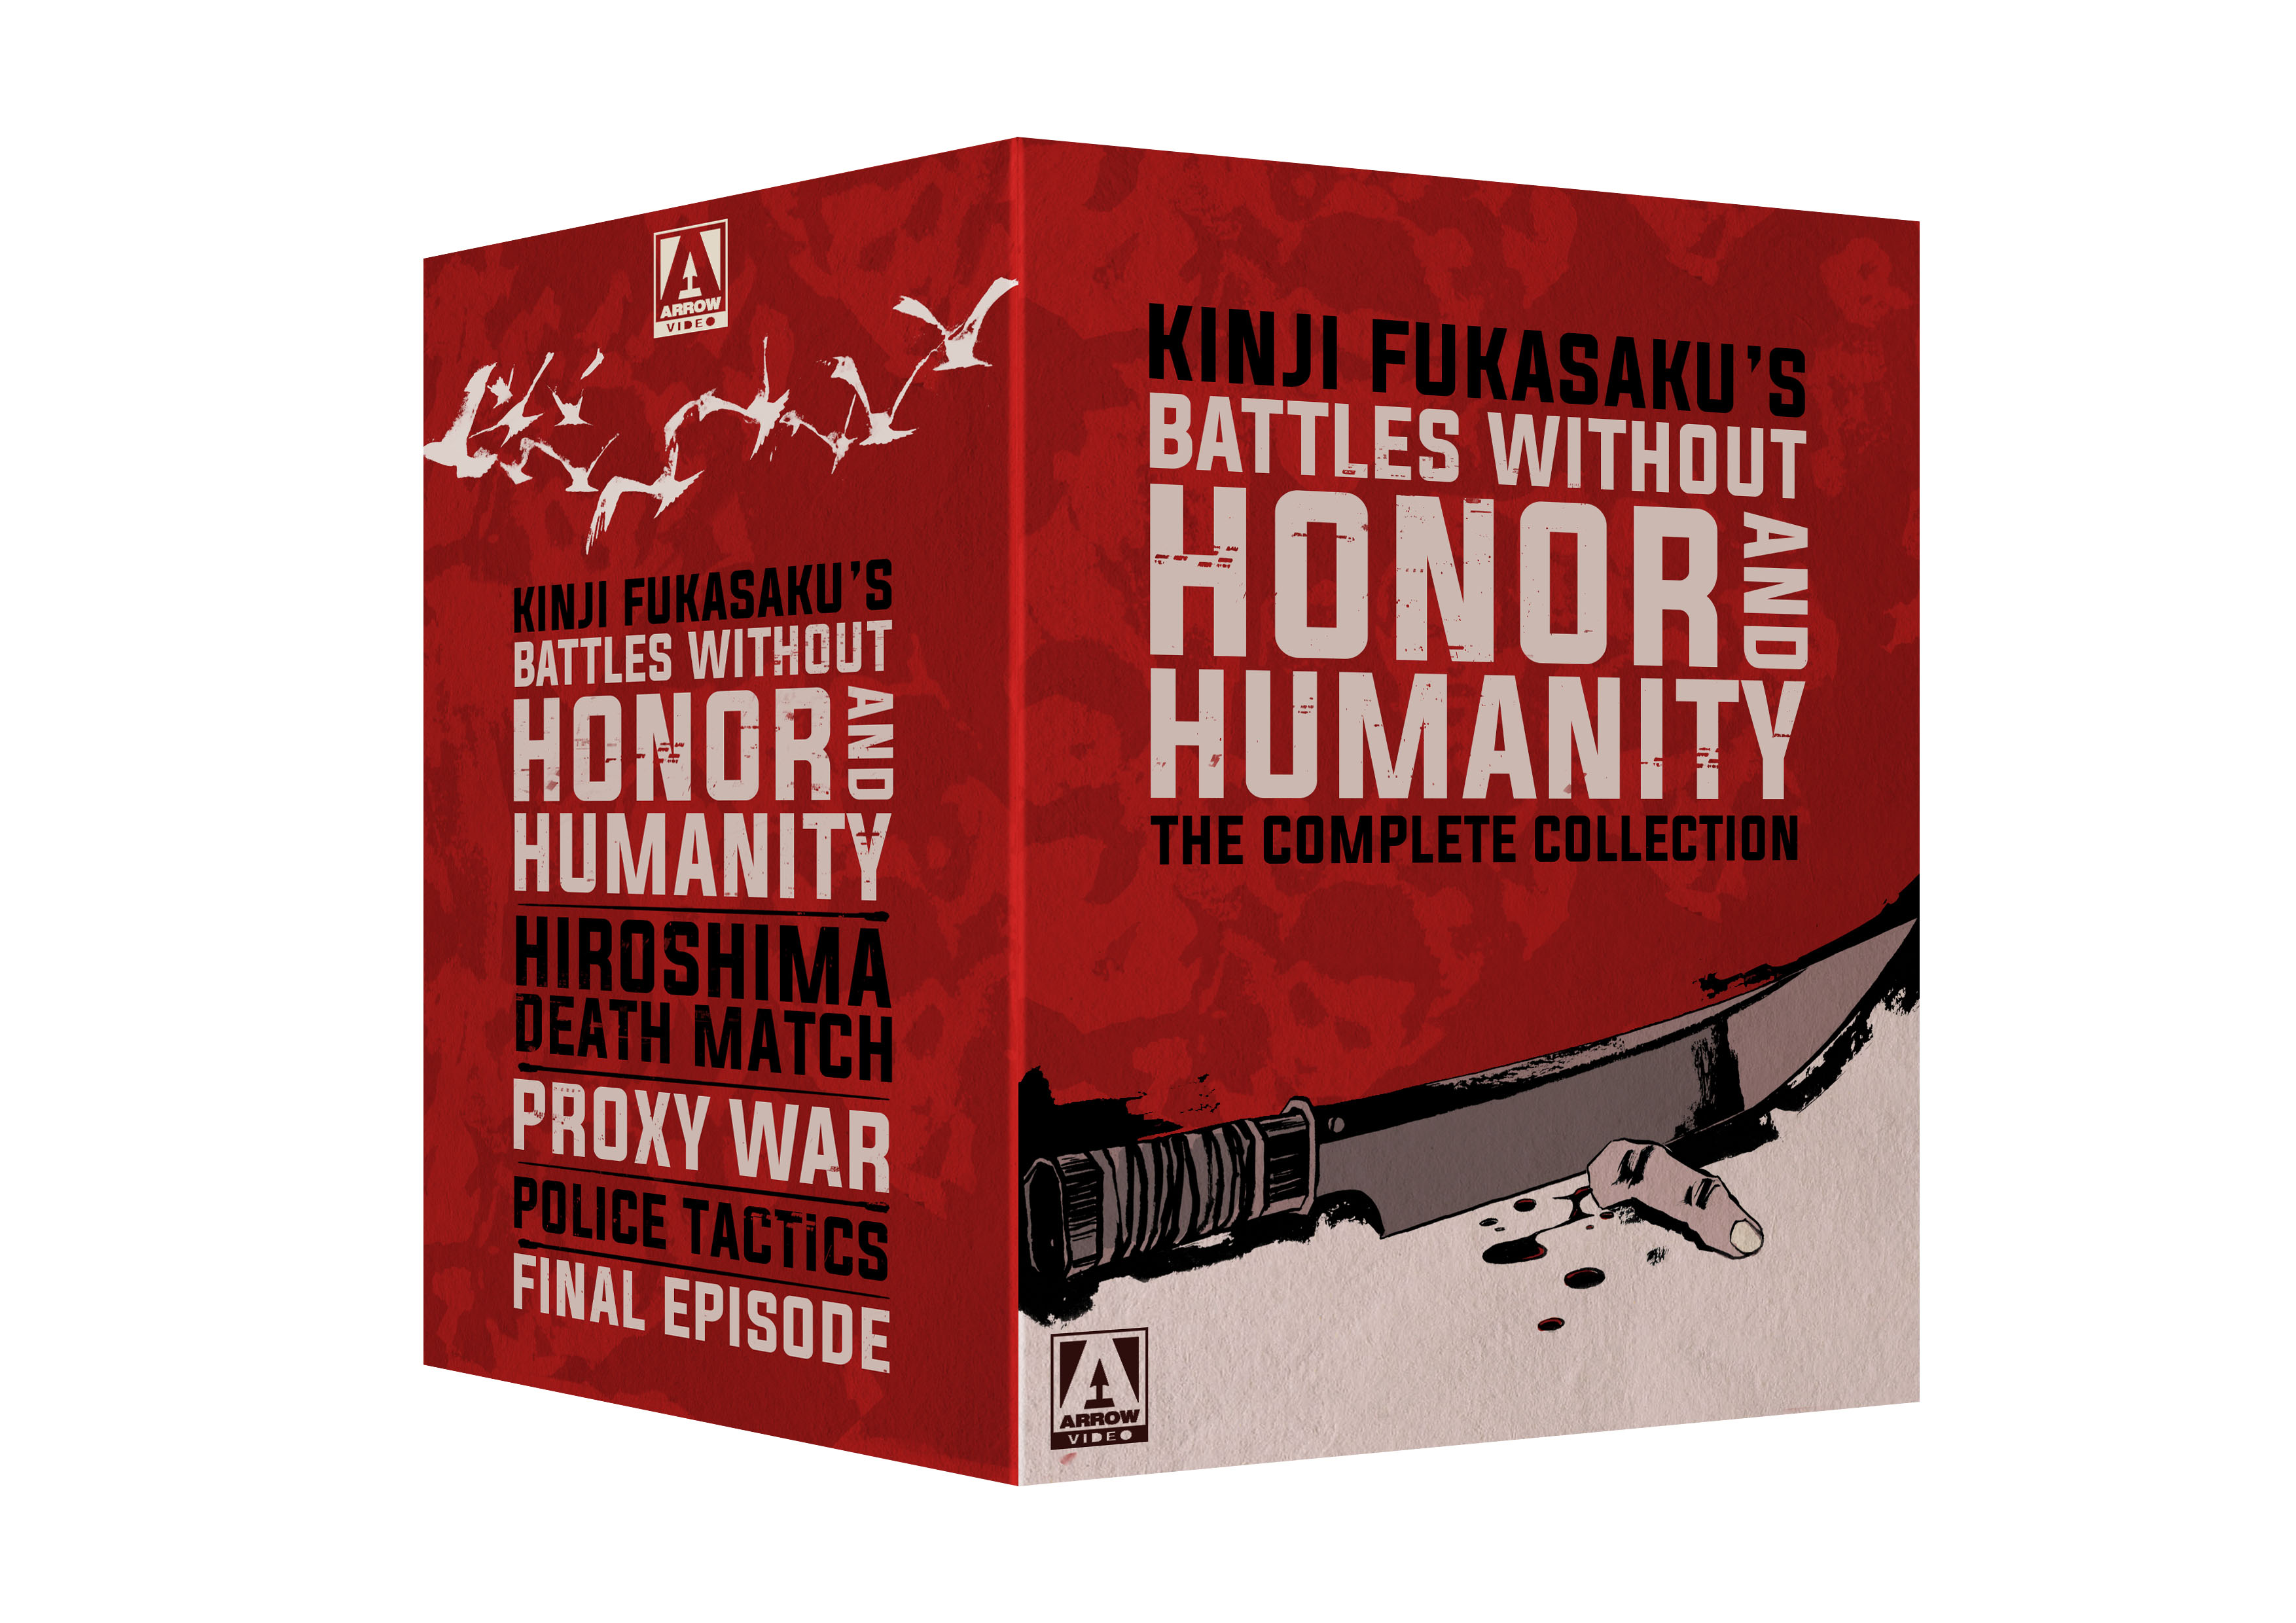 Without honor or humanity. Battle without Honor. The Human limit. Without Honor or Humanity movie. The Human limit GD.